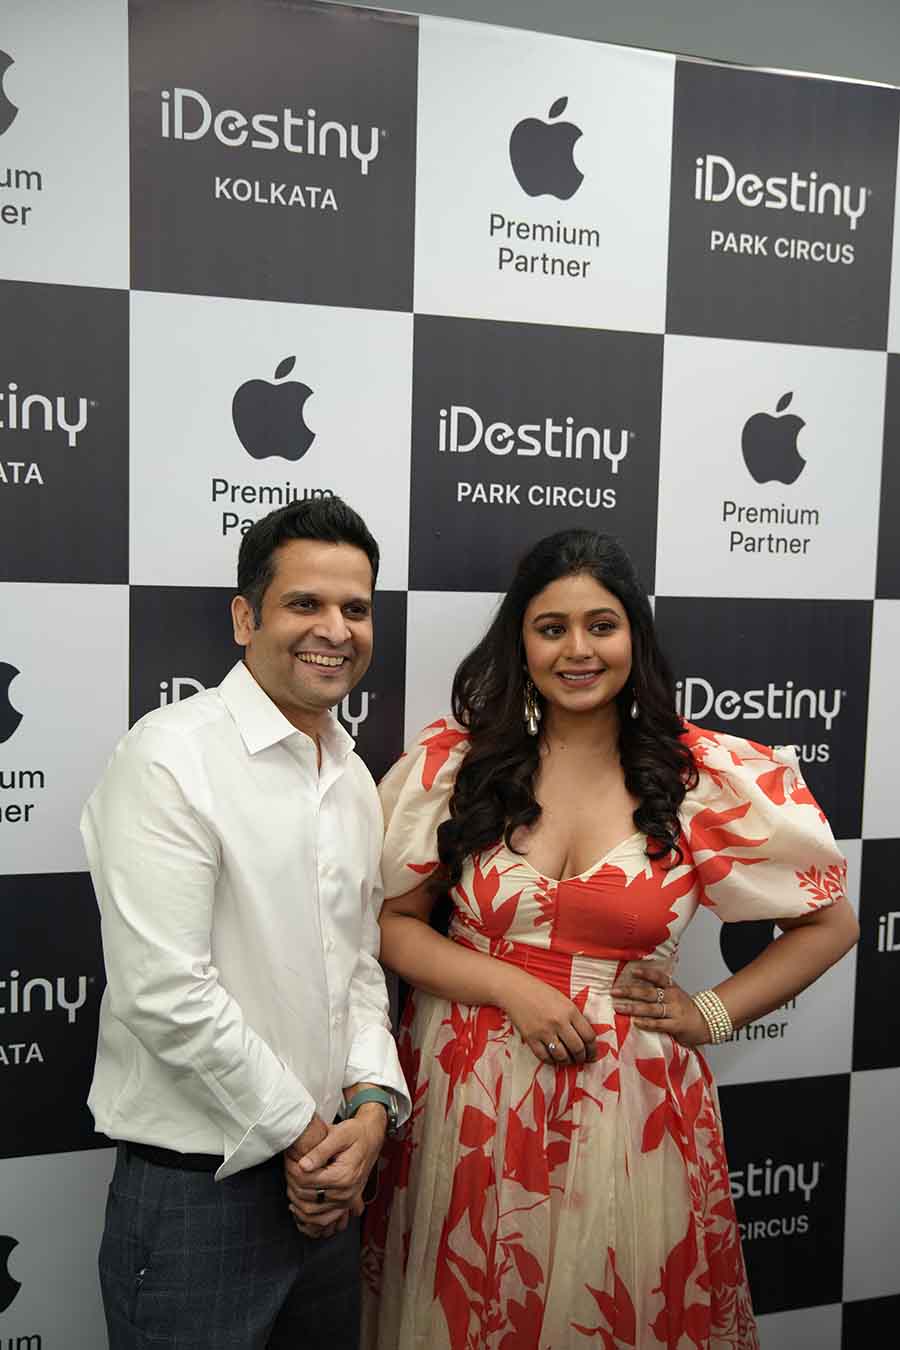 ‘We are excited to introduce Kolkata’s first and largest Apple Premium Partner Store, underscoring our unwavering commitment to delivering exceptional products and services to our valued customers. This strategically located store is set to become a premier destination for Apple product enthusiasts in Kolkata and West Bengal,’ remarked Vijay Dugar, director of iDestiny - Apple Premium Partner